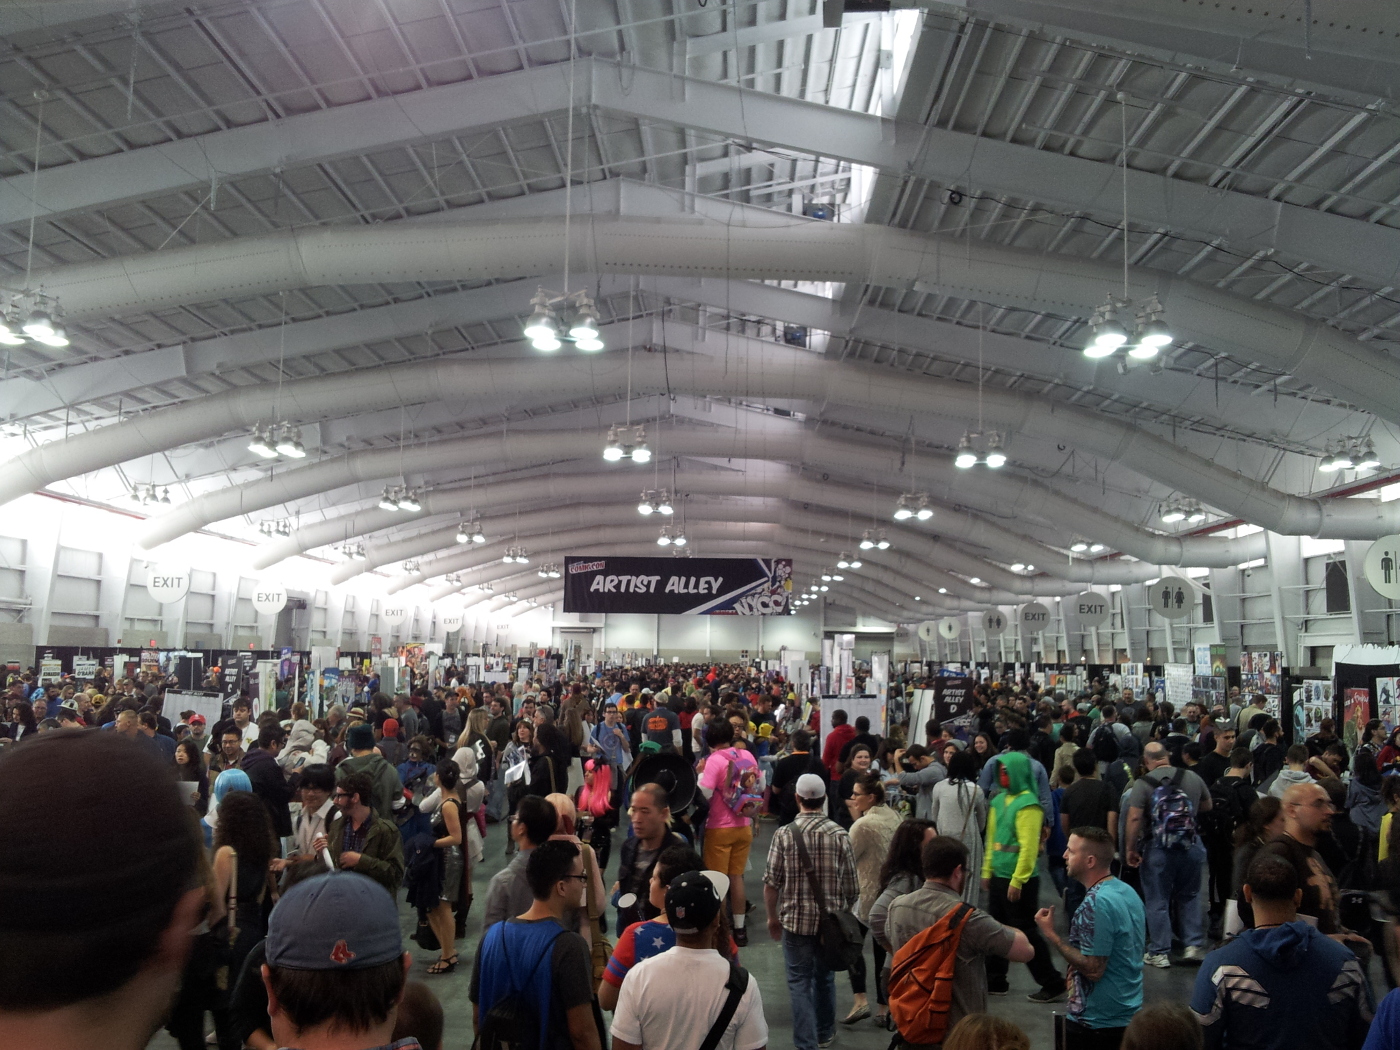 NYCC 2015 - Artist Alley